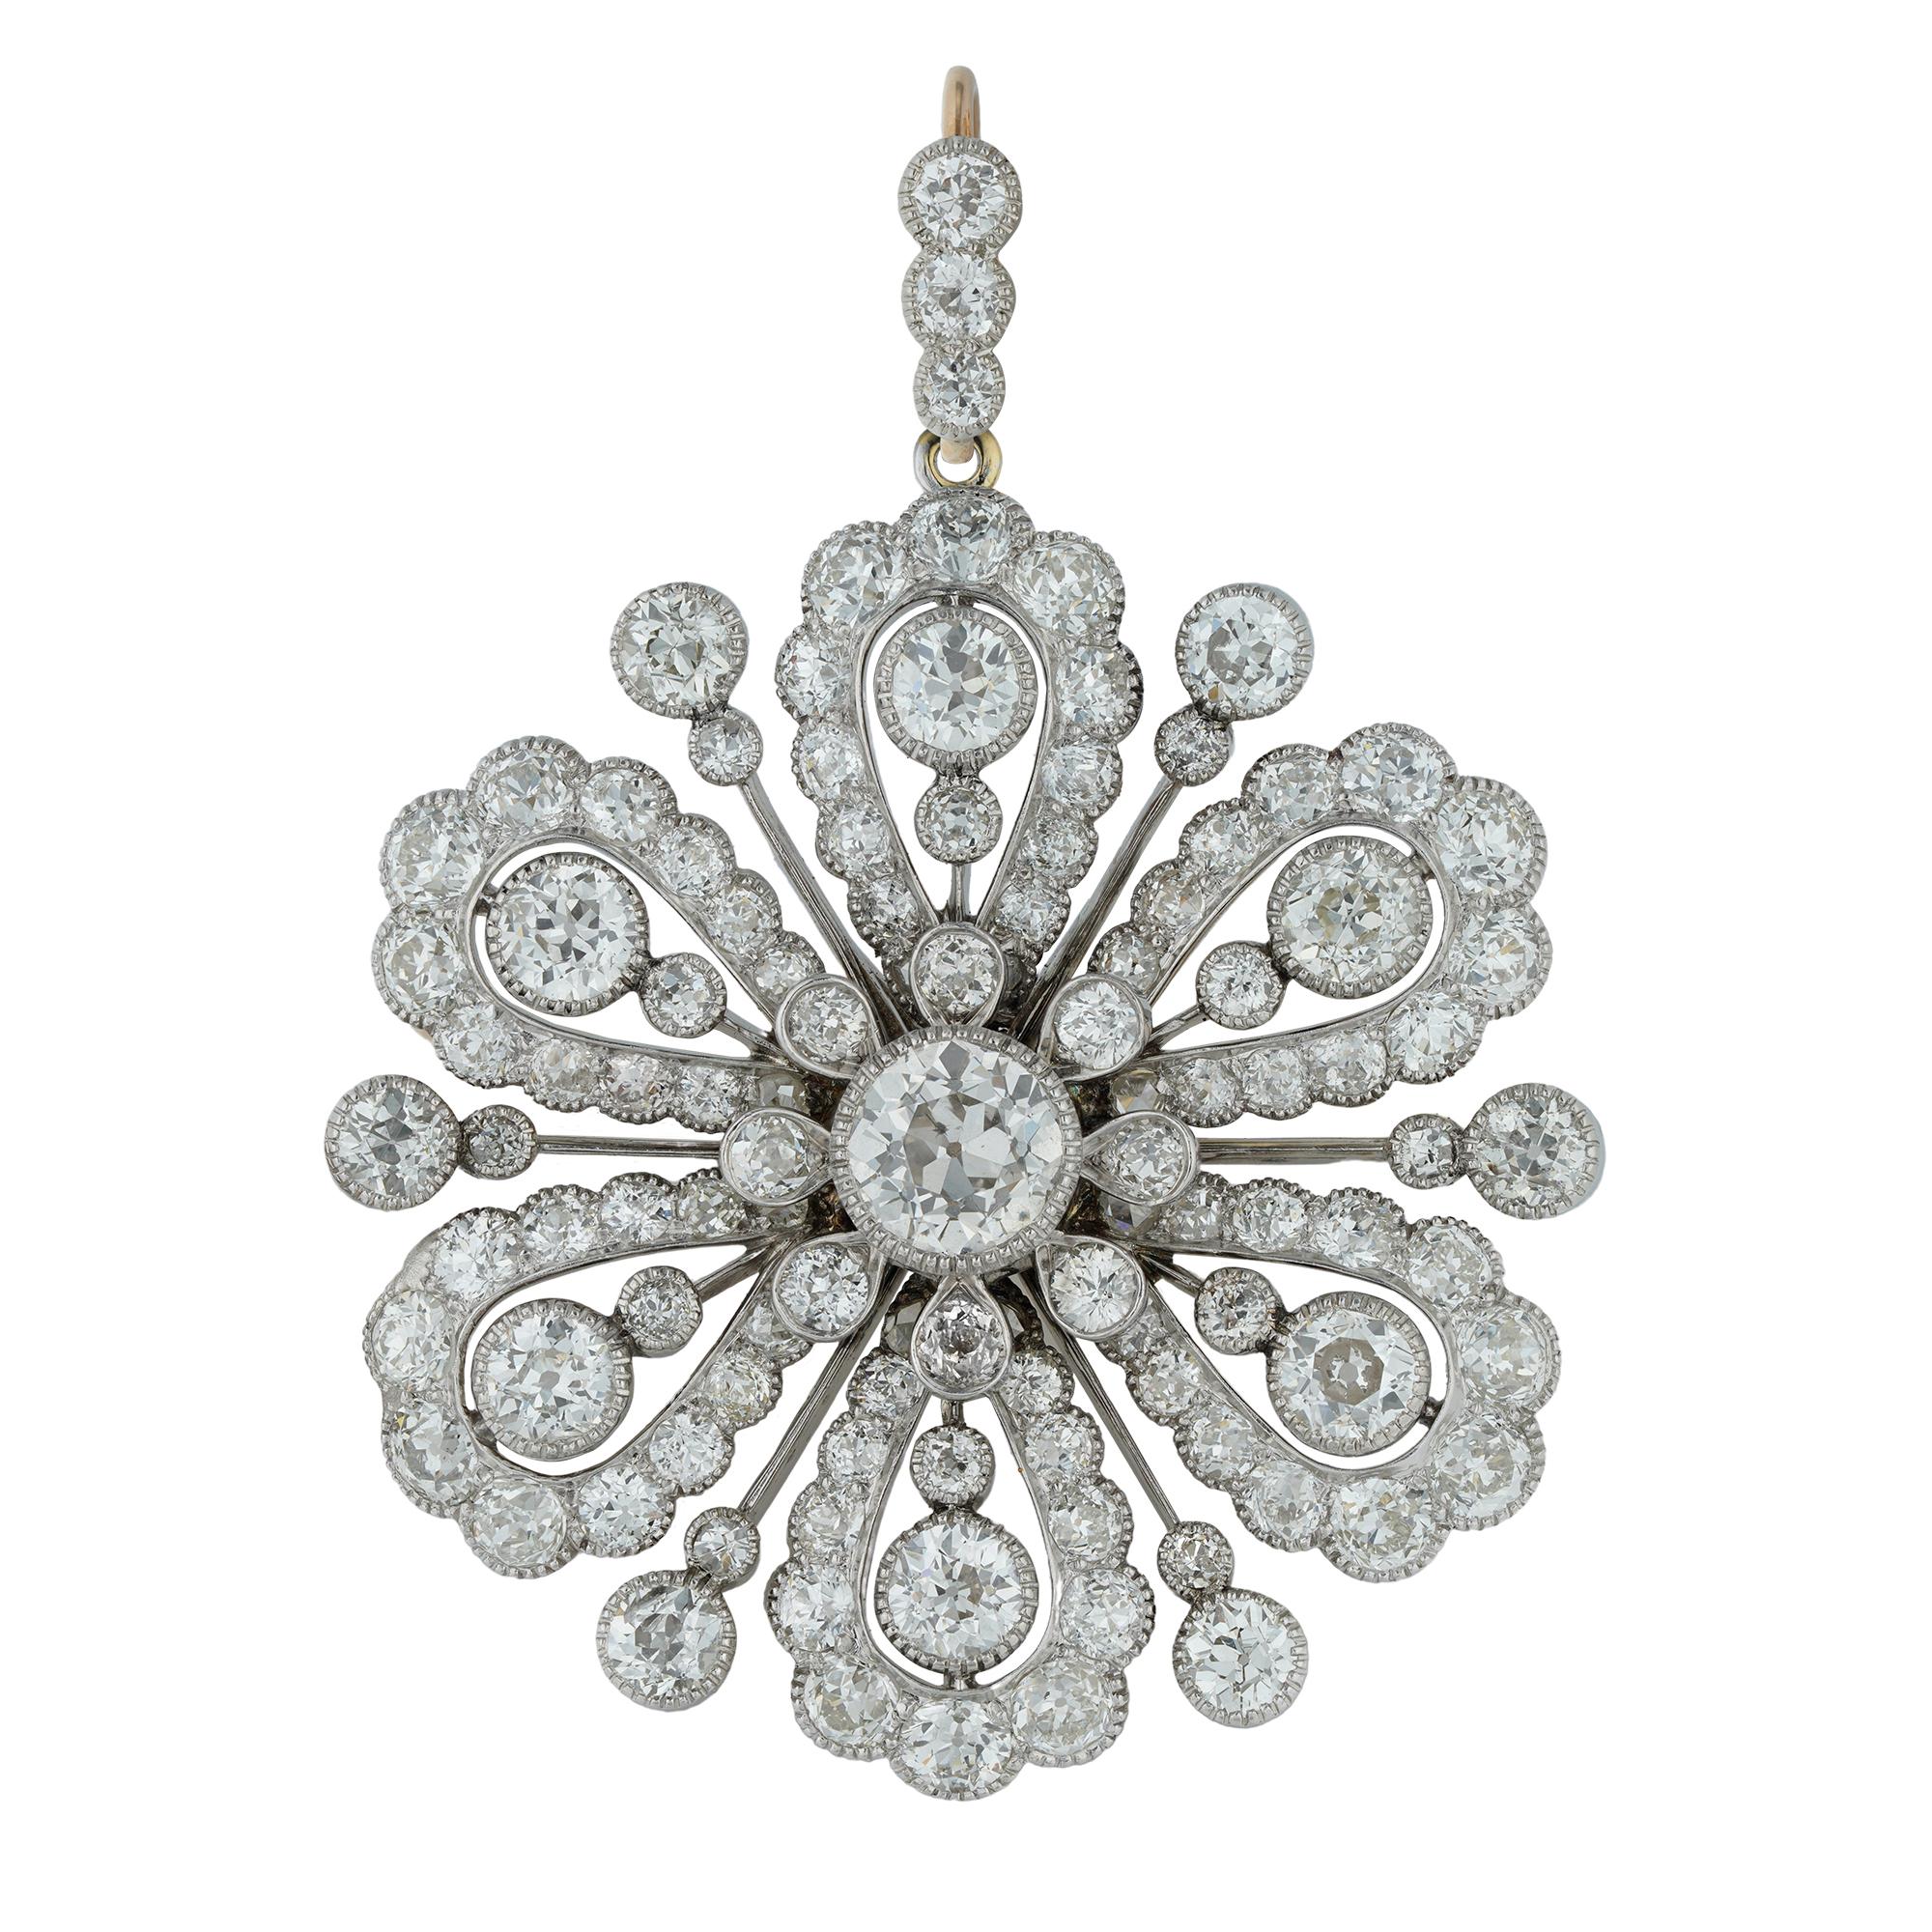 An early 20th century diamond centre and cultured pearl necklace, the detachable diamond-set centre of openwork flower cluster design, all set with old European-cut diamonds, estimated to weigh 11.5 carats in total, the central diamond estimated to